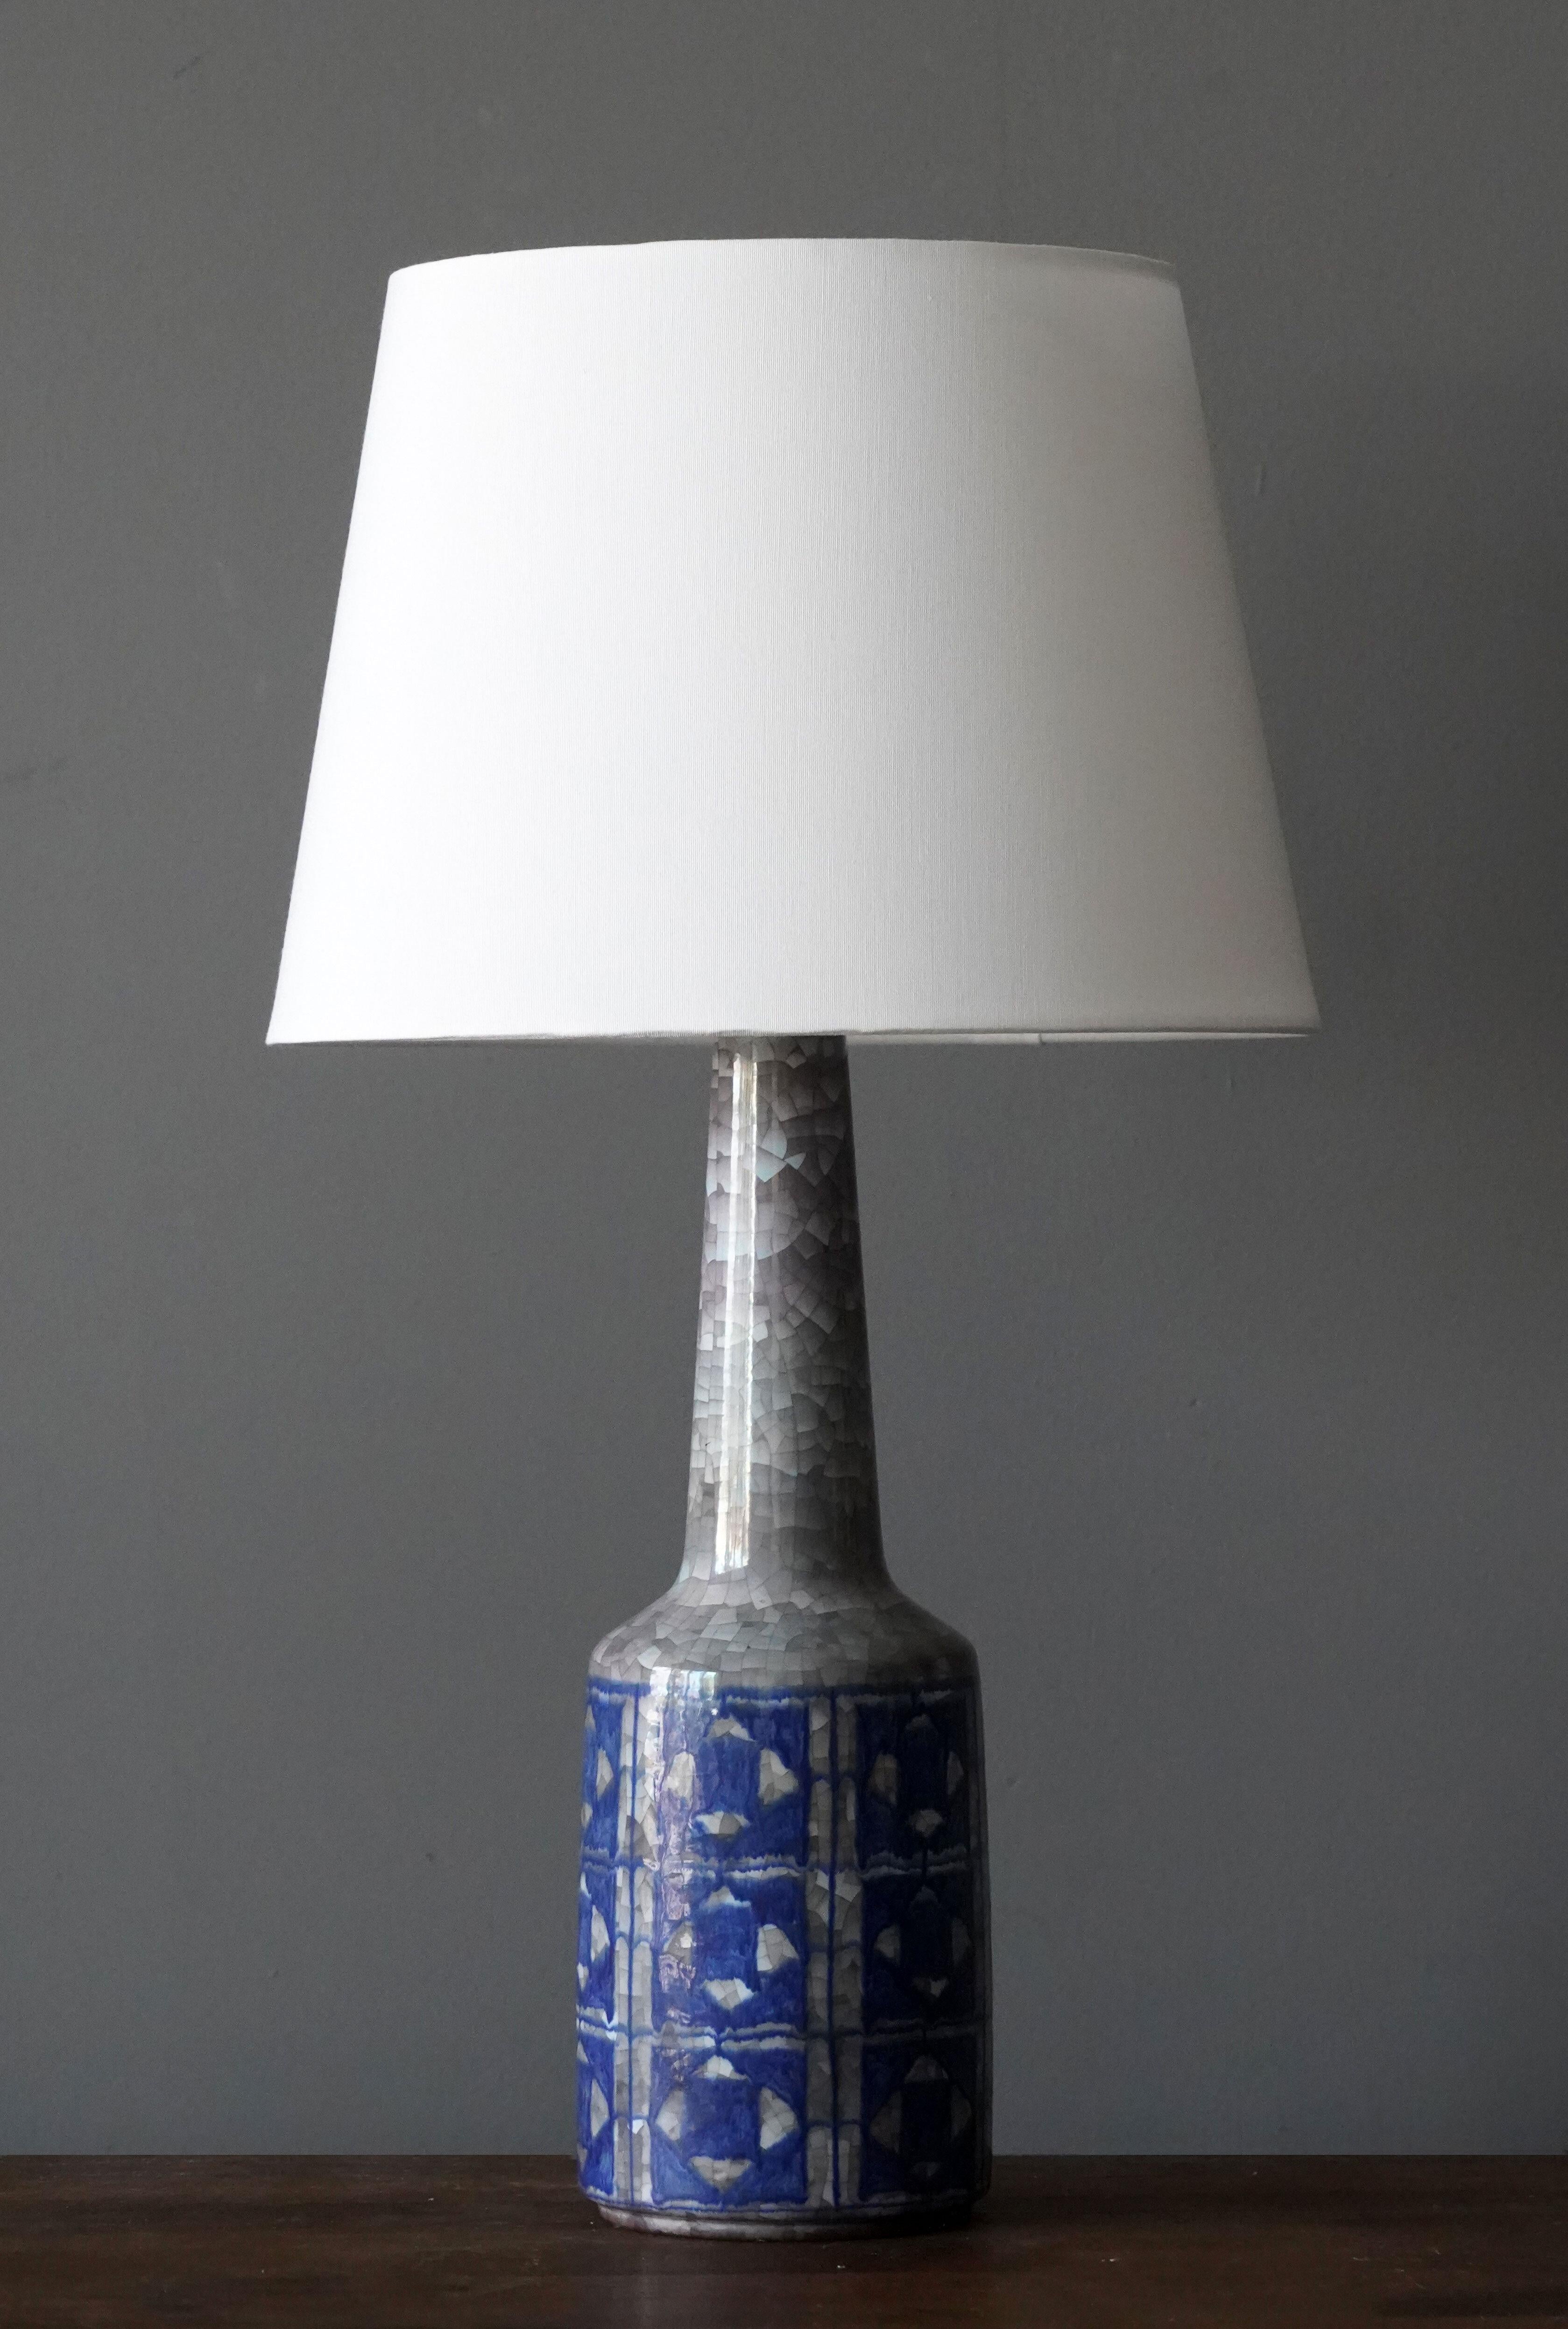 A table lamp produced by Michael Andersen Keramik. In hand painted stoneware 

Purchase excludes lampshade. Stated measurements excluding lampshade.

Glaze features blue-grey colors.

Other ceramicists of the period include Axel Salto, Arne Bang,